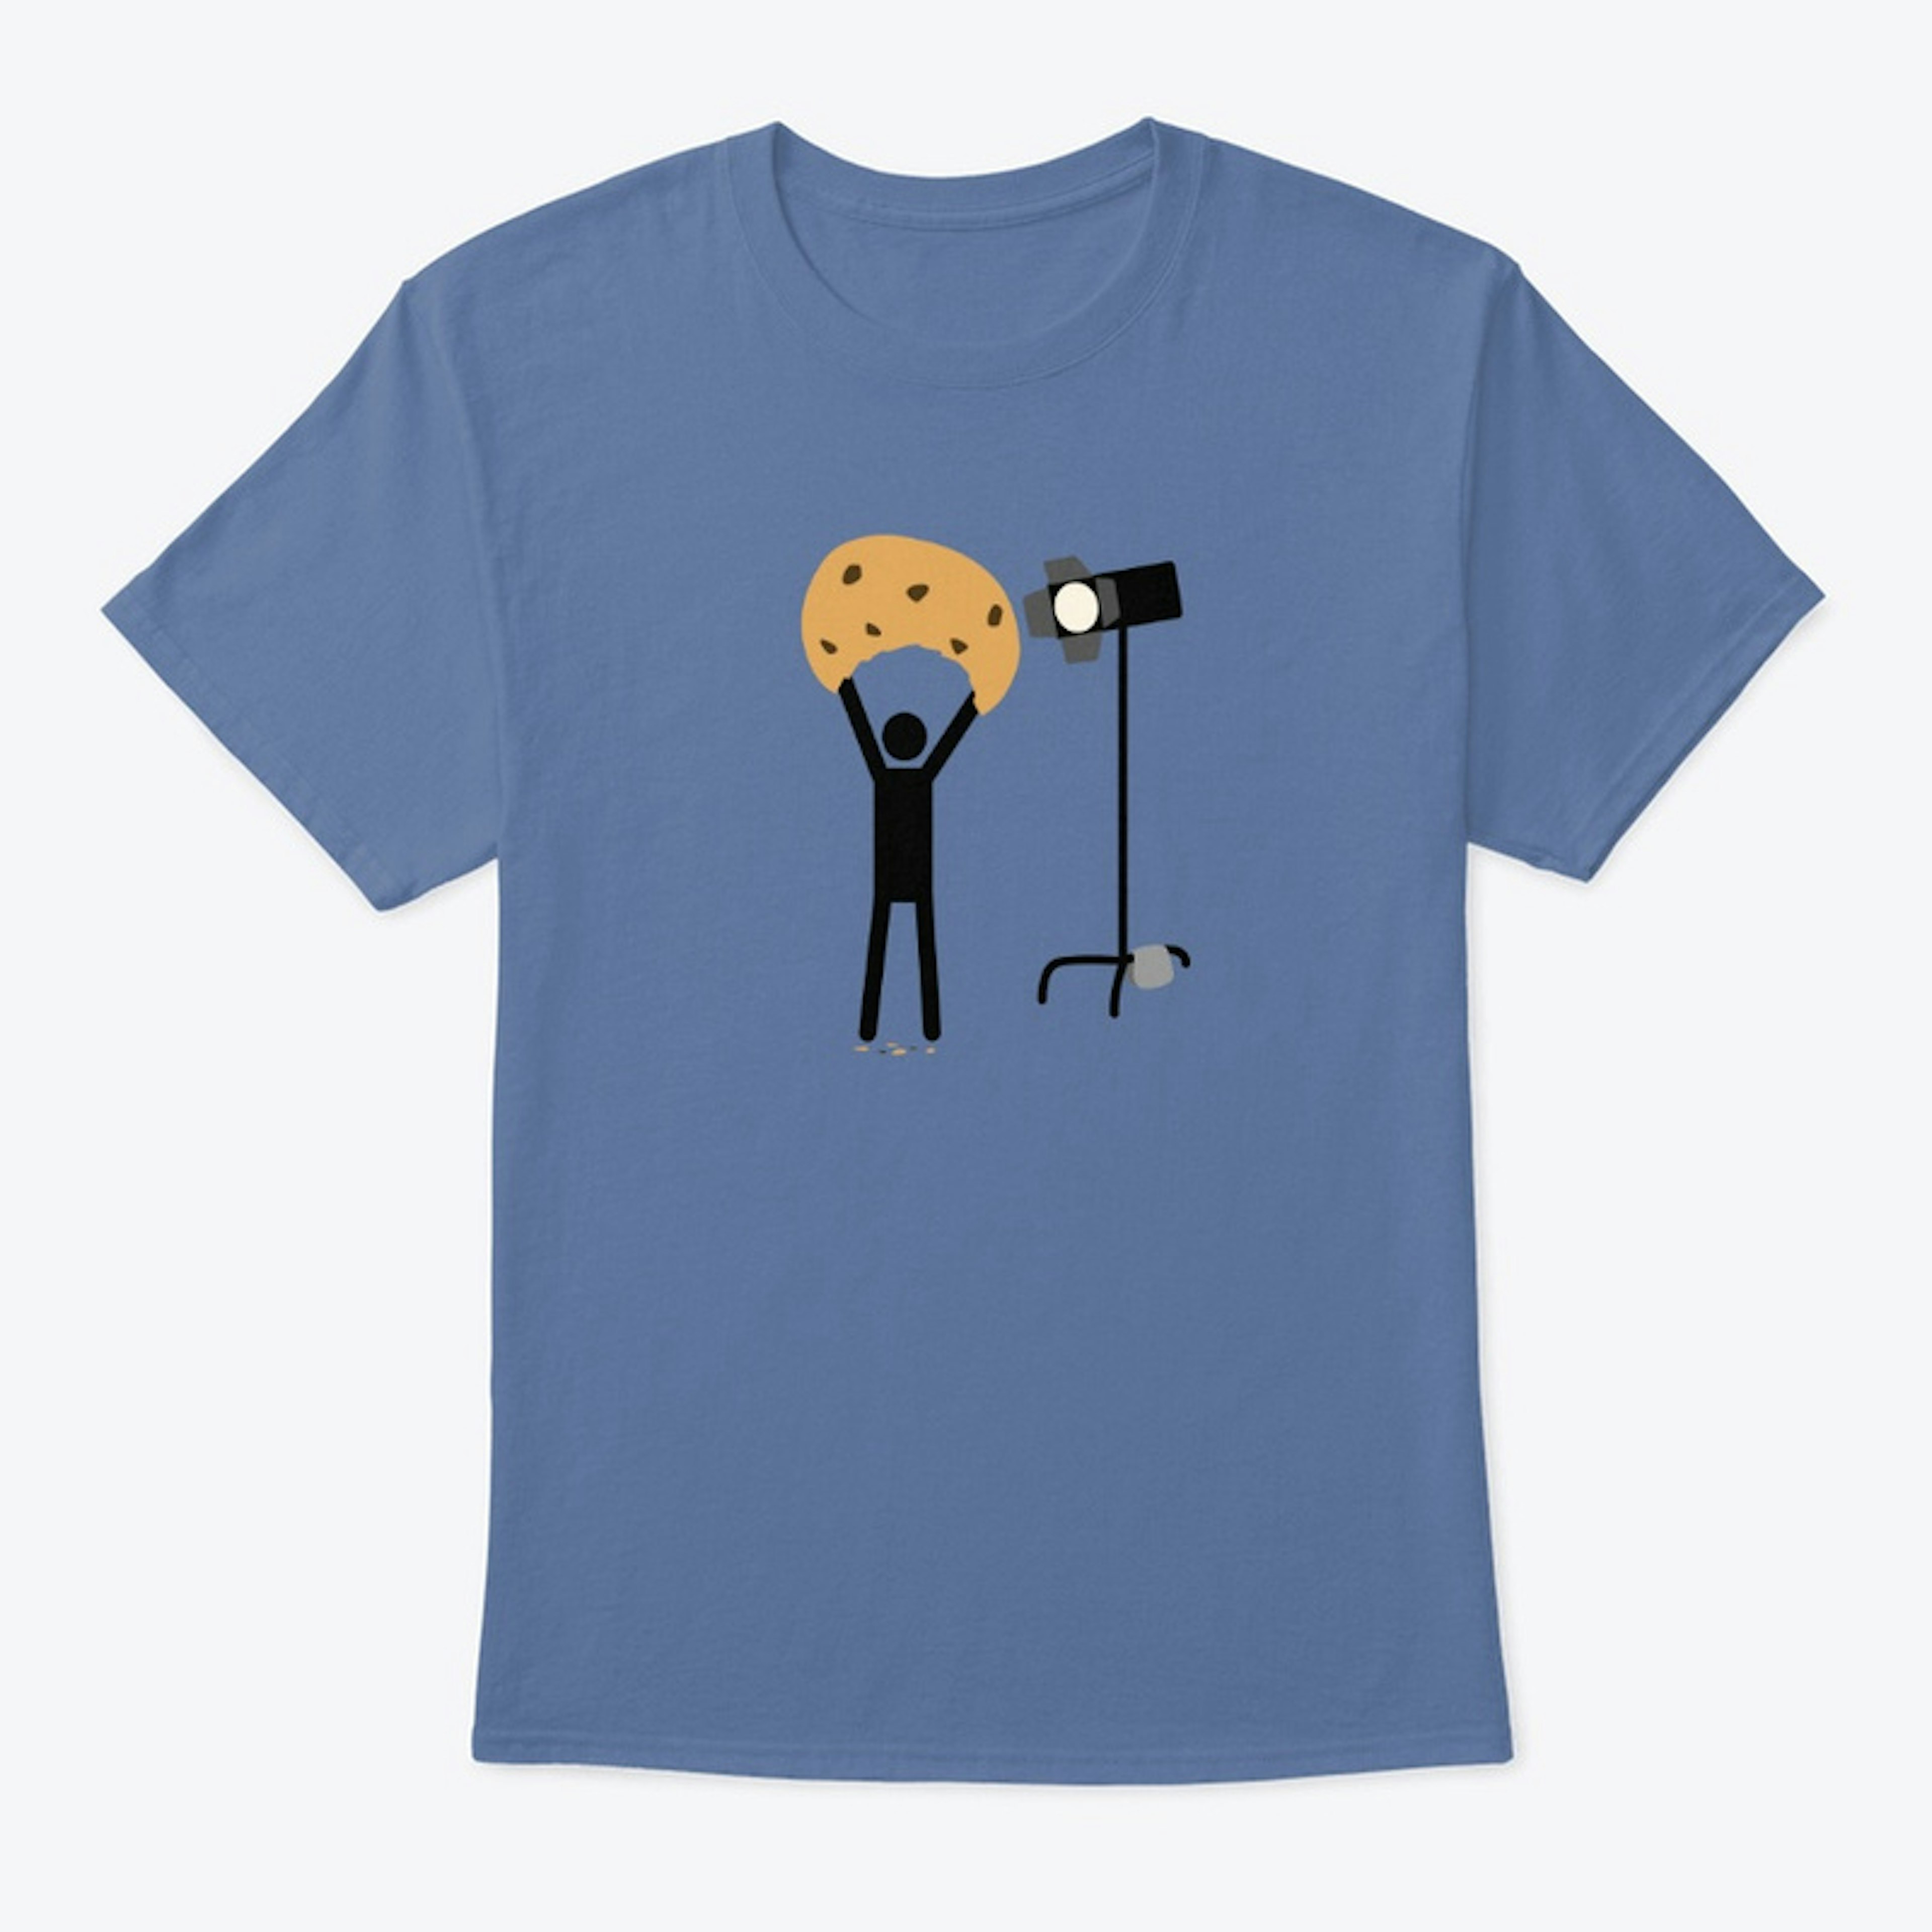 Use The Cookie | Unisex T-Shirt